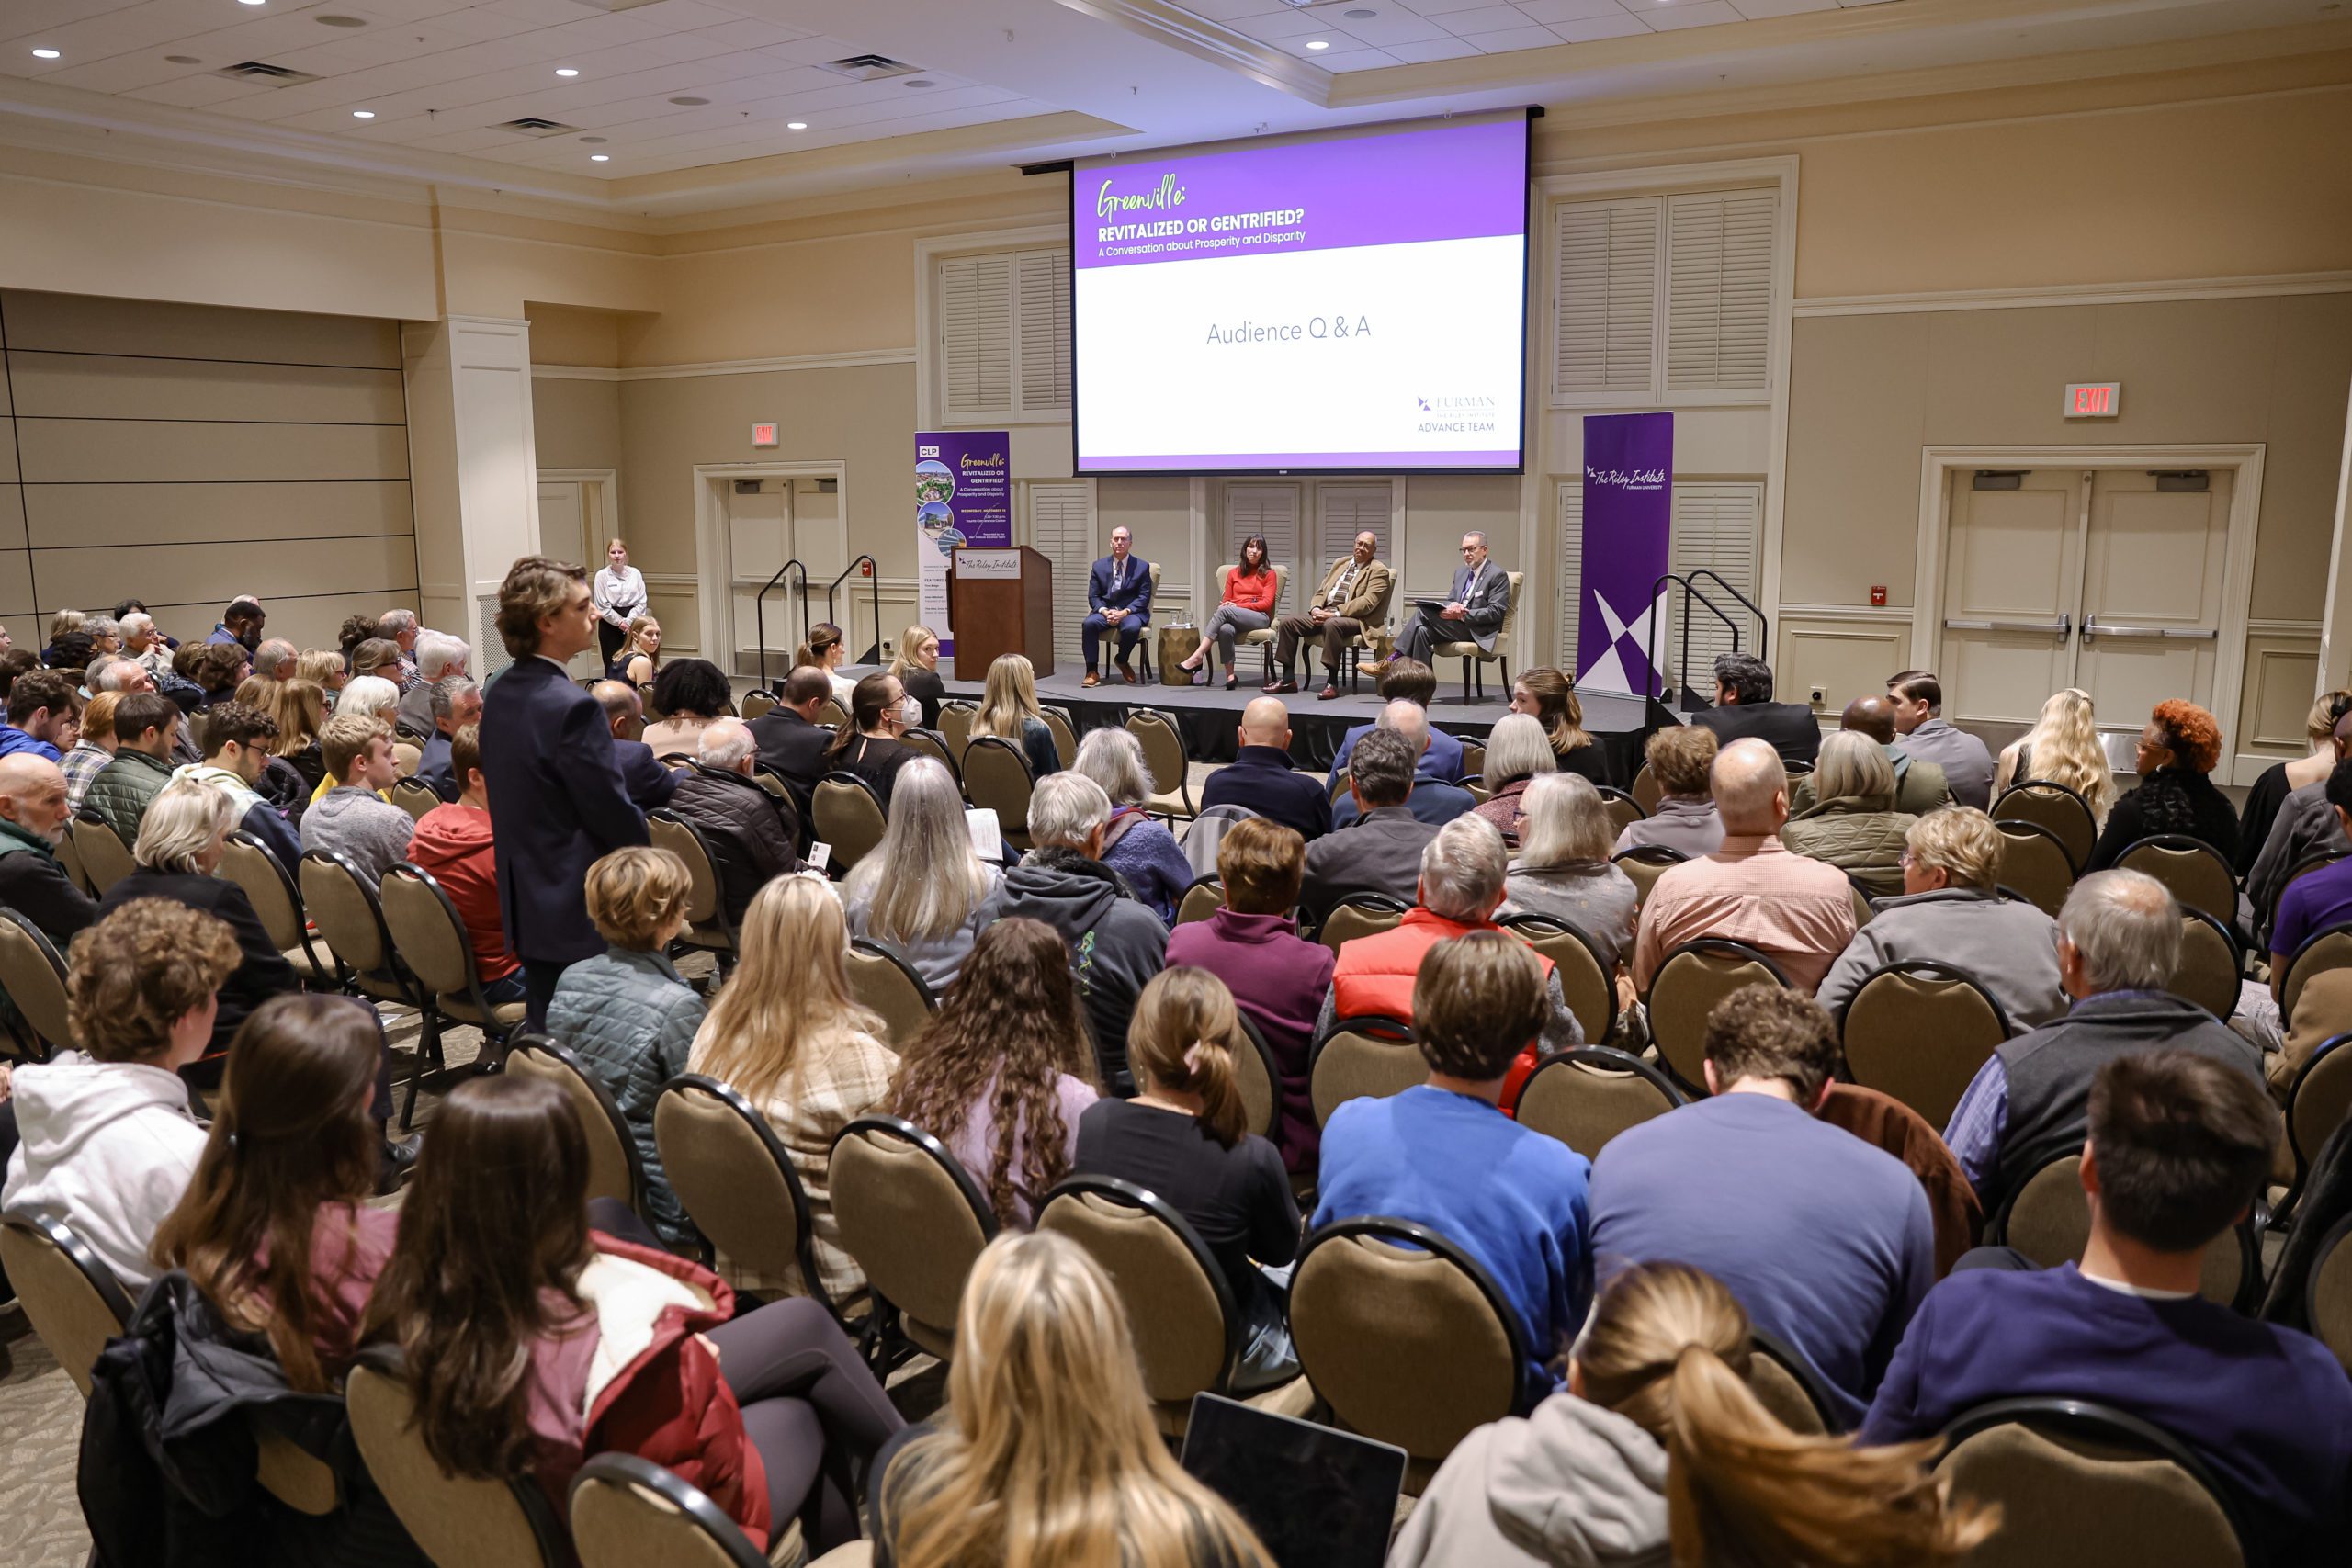 The program concluded with audience questions from community members and students, providing thought-provoking discussions among the panelists.